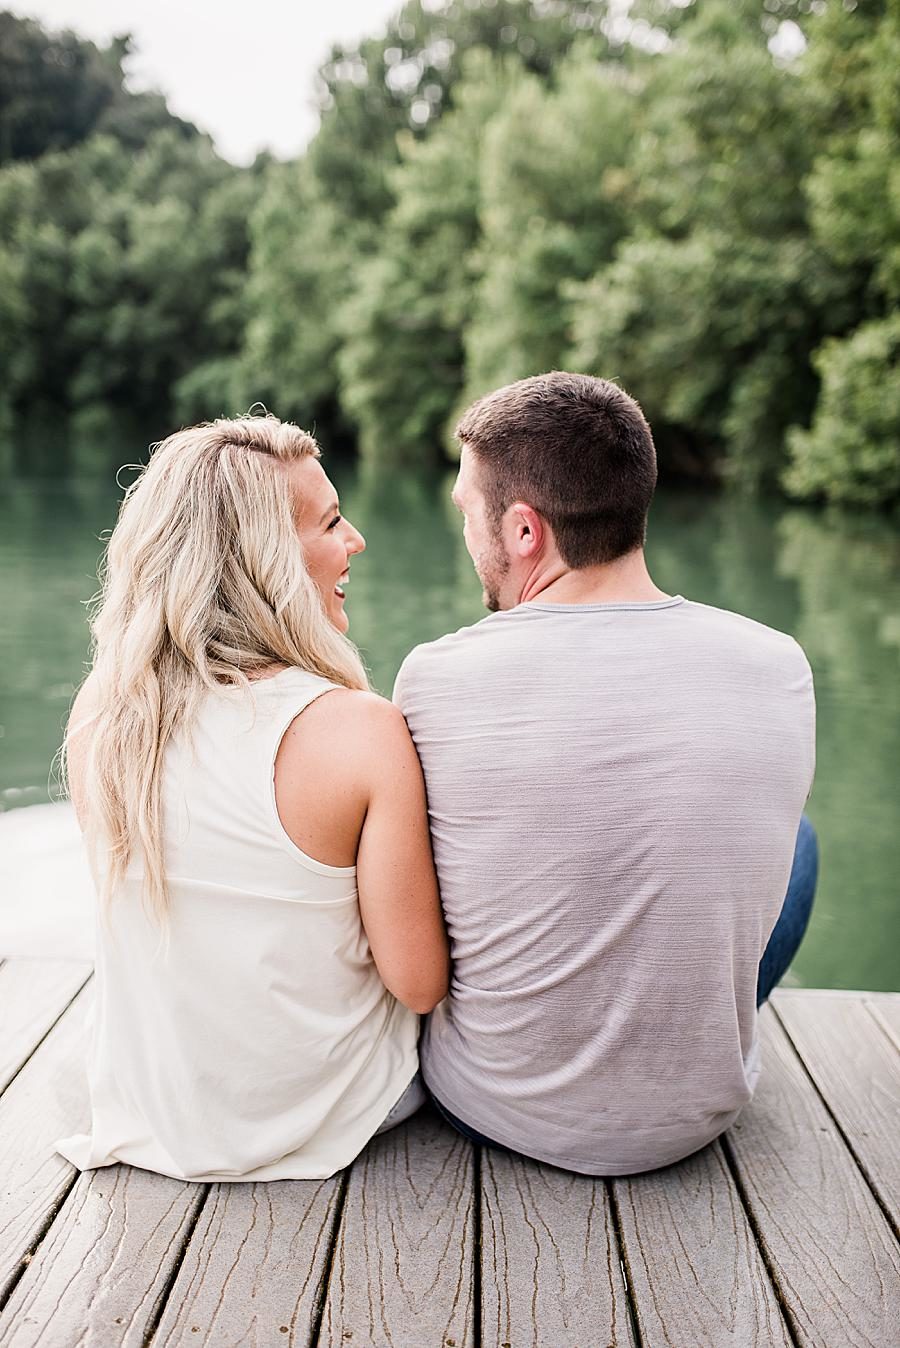 Casual engagement outfit by Knoxville Wedding Photographer, Amanda May Photos.